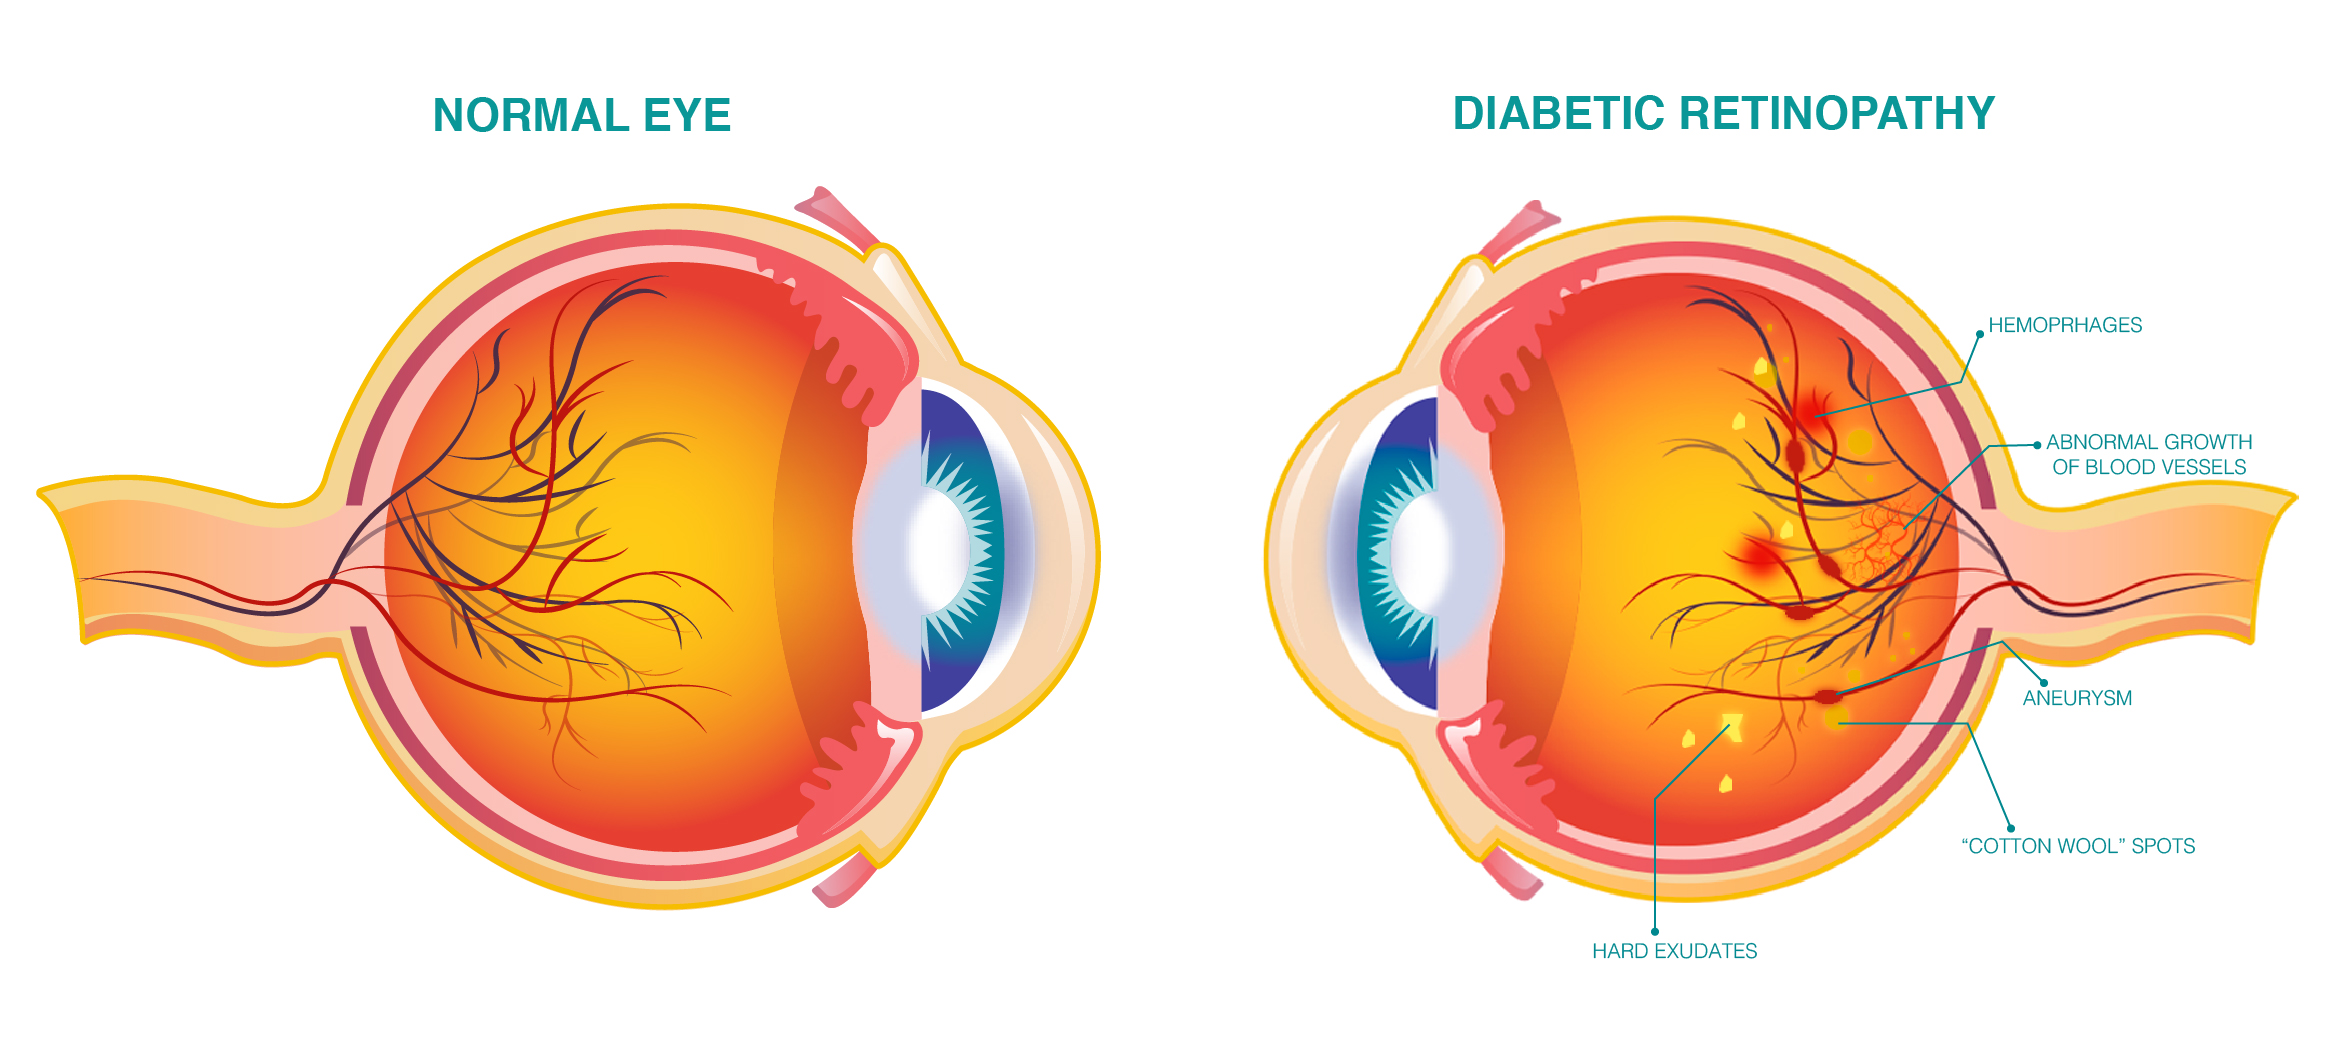 Diabetic Retinopathy vision loss Treatment In Ayurveda Normal Vision Blurred Vision dark floaters regular eye check-up eye issues